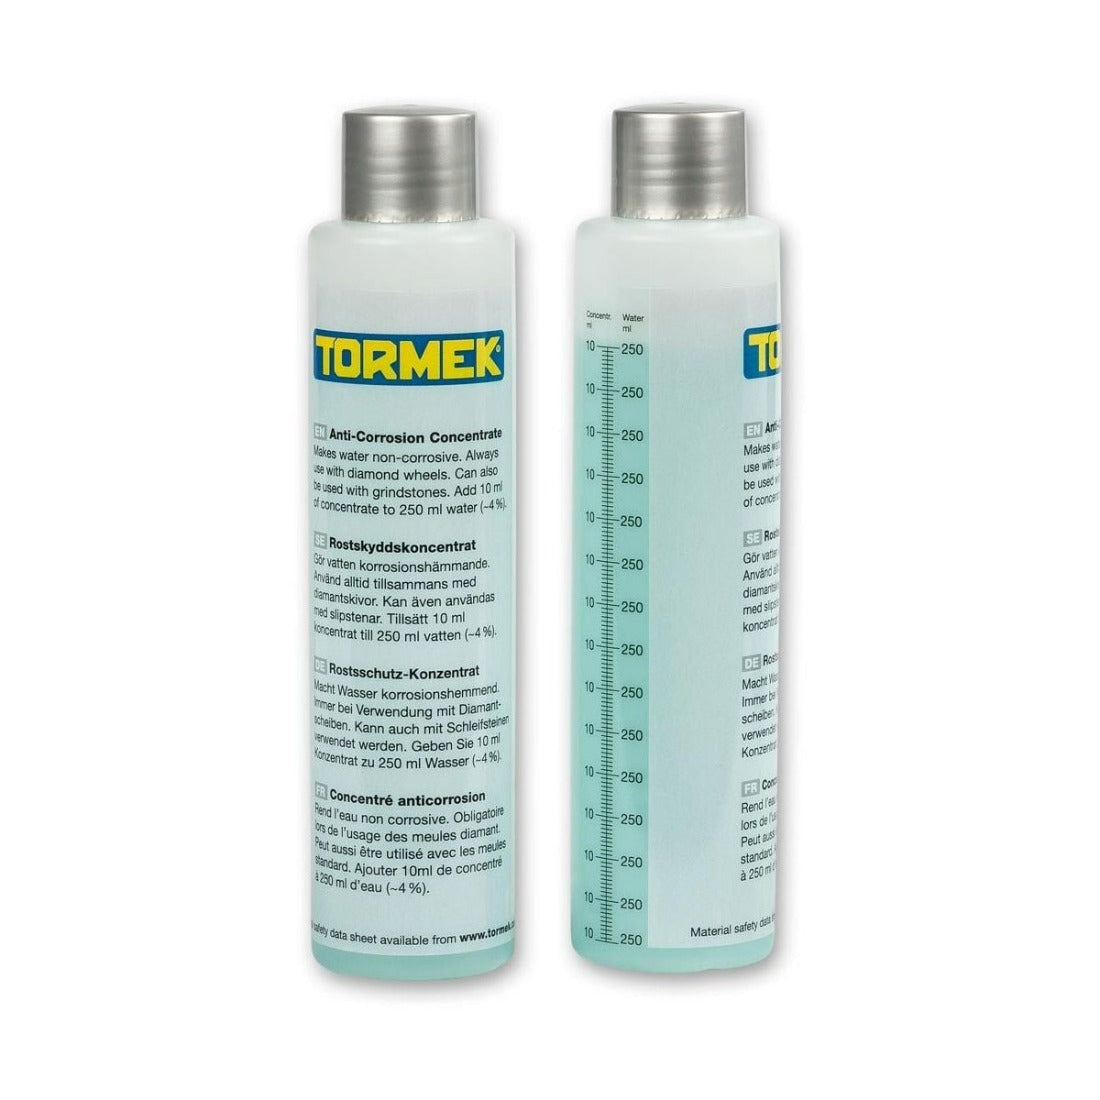 Tormek ACC-150 Anti-Corrosion Concentrate pack of 2 bottles with a quantity of 150ml per bottle